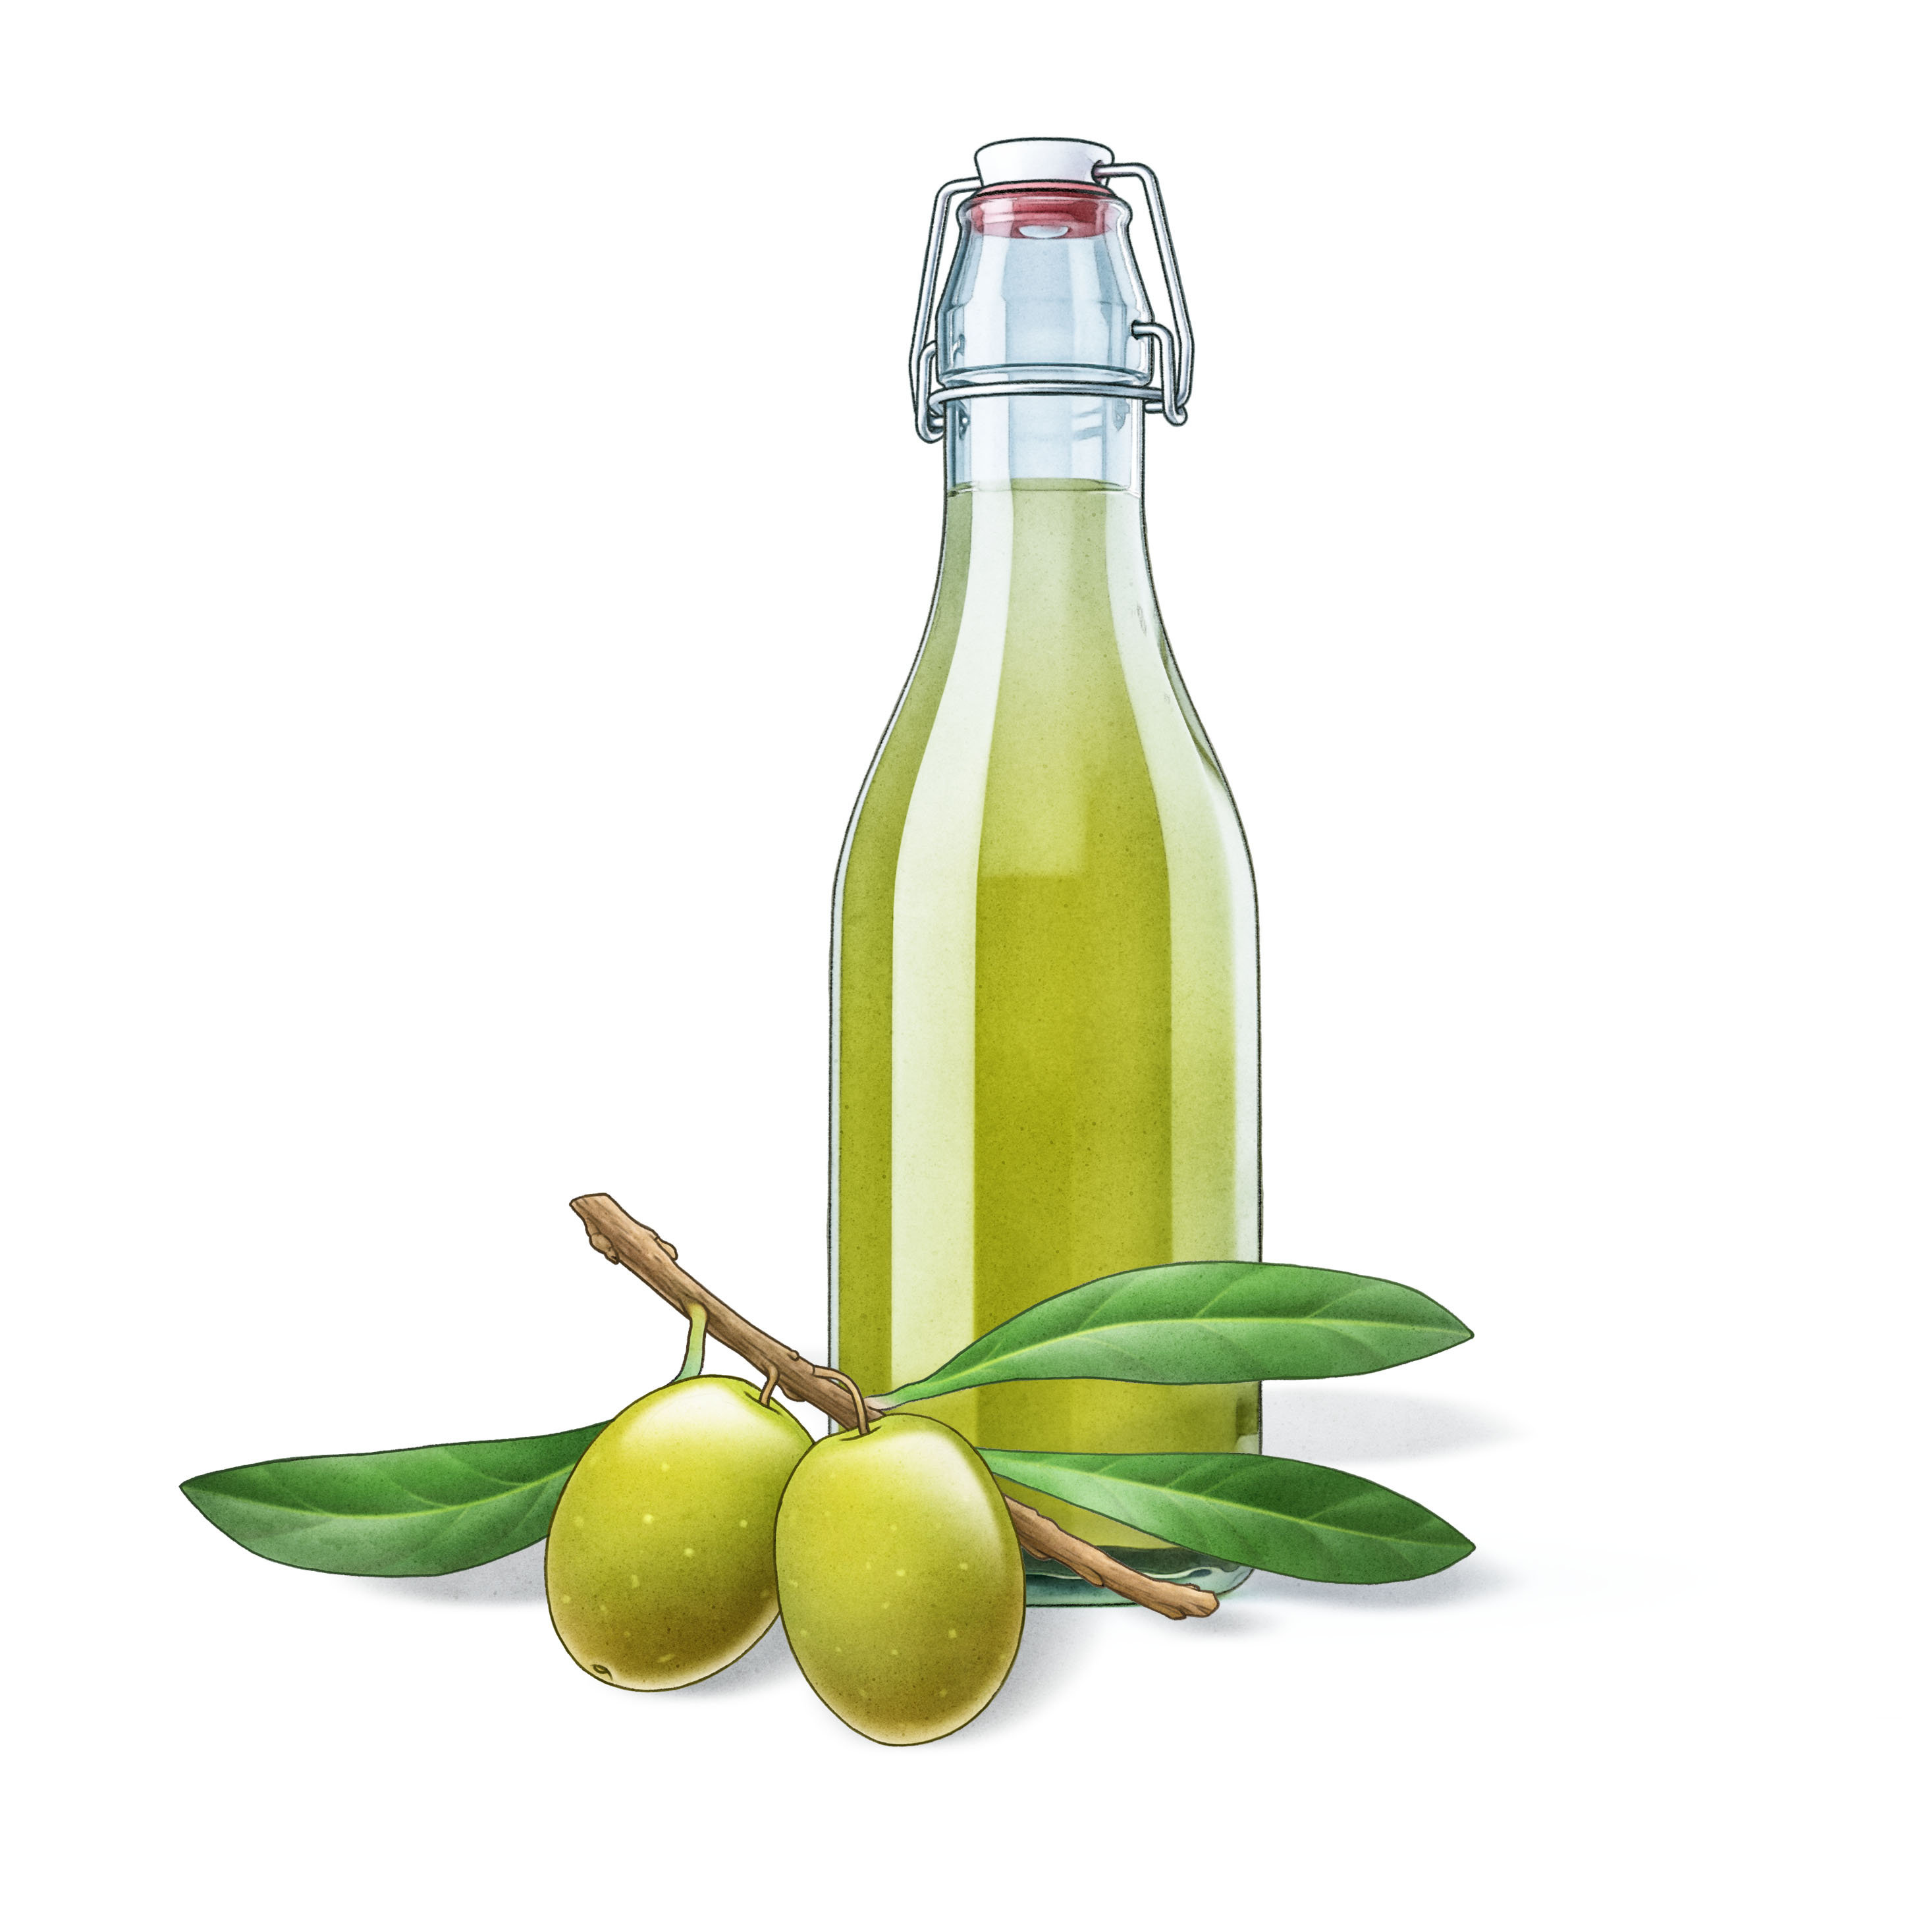 A bottle of olive oil, and a branch with leaf olivkvist olja